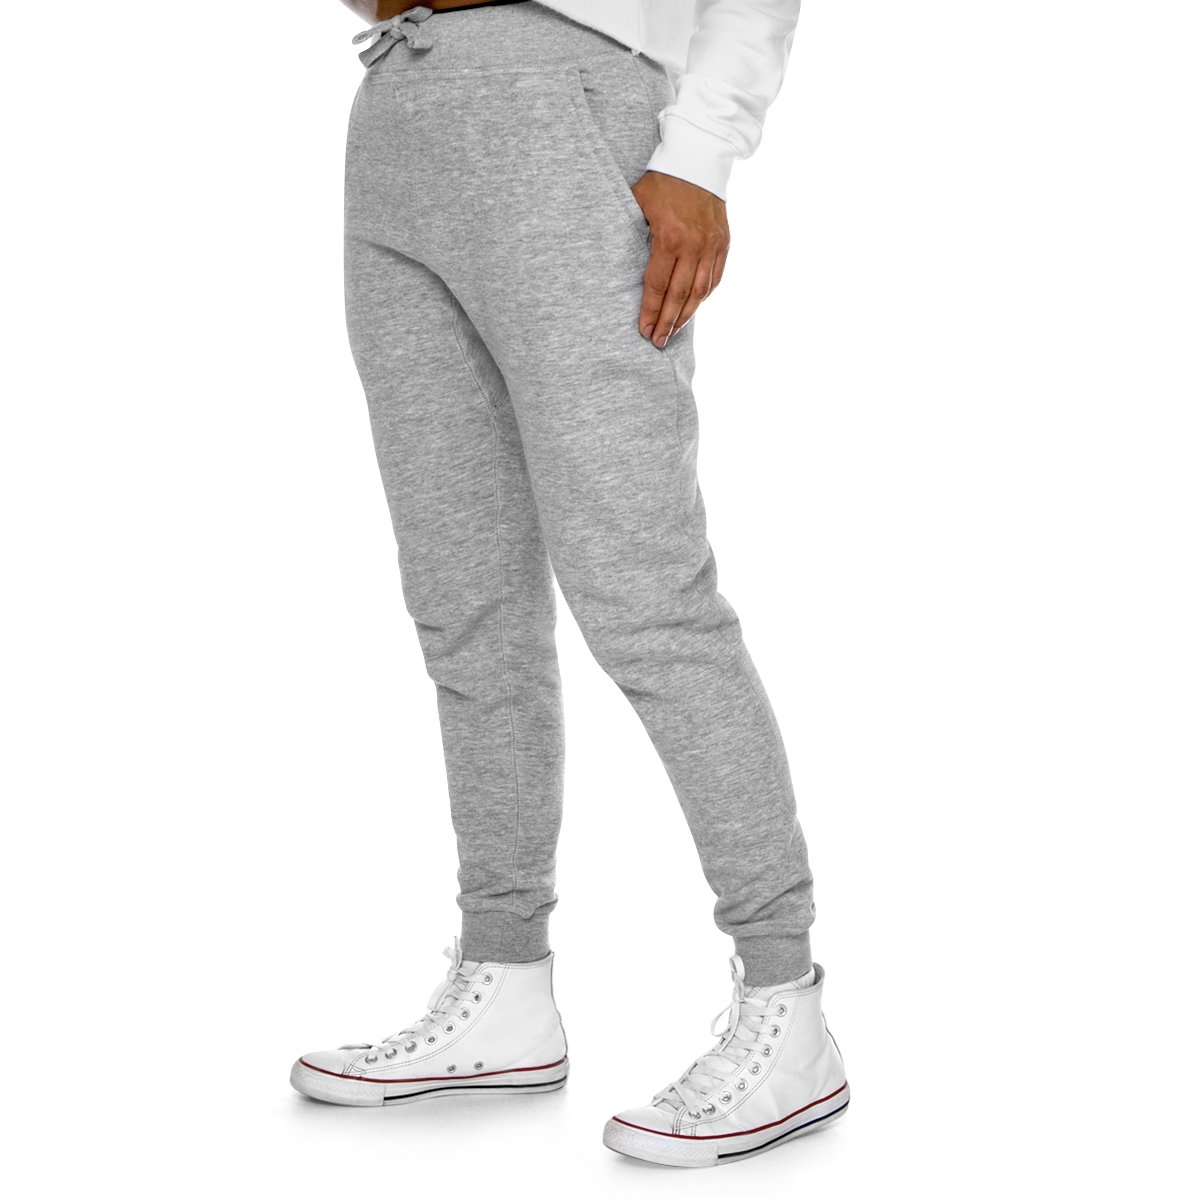 Unisex Fleece Joggers "Just One More" product thumbnail image